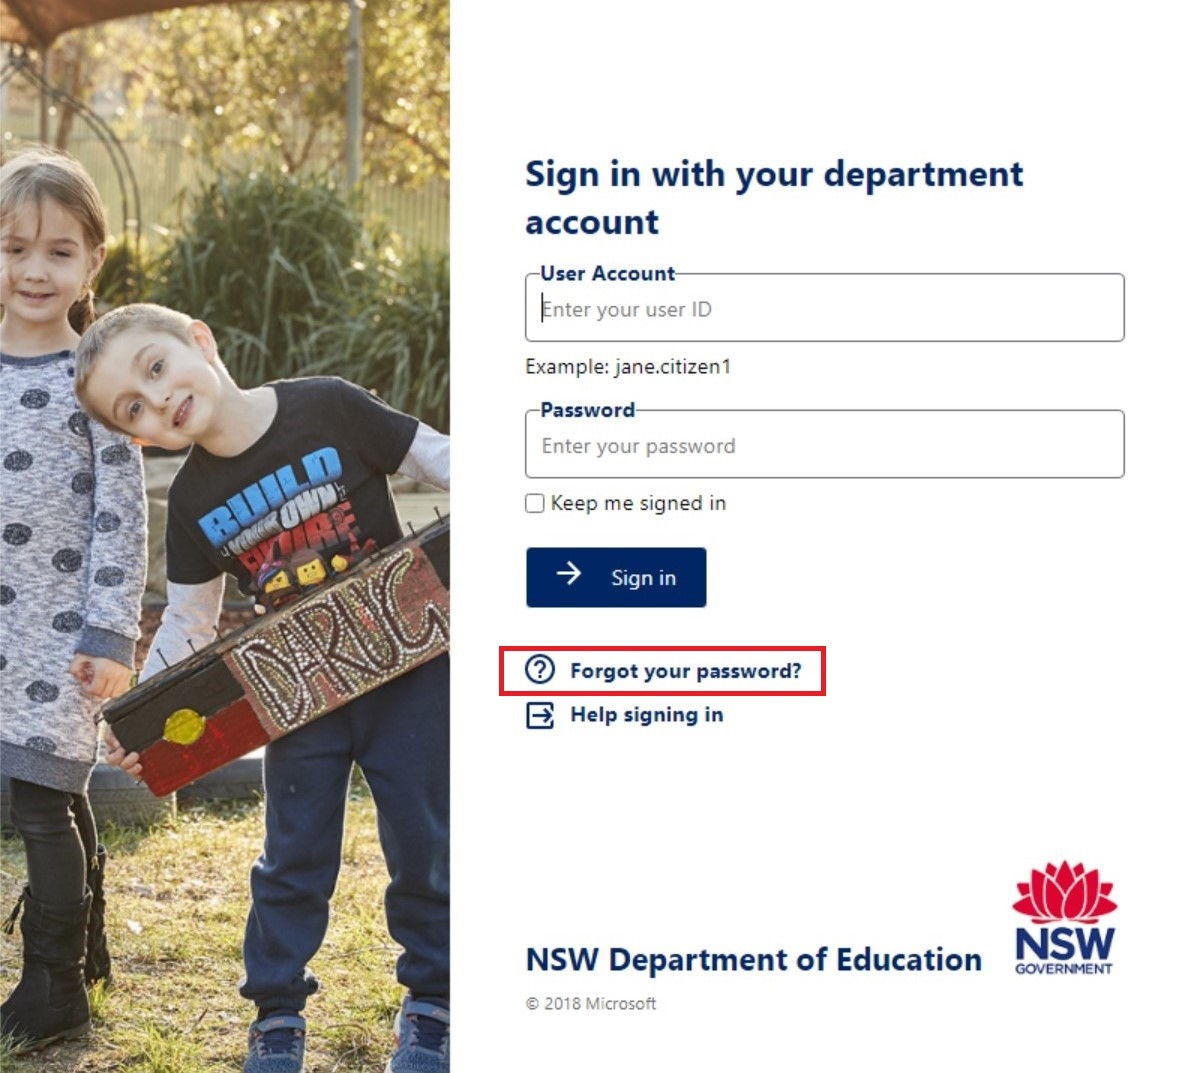 Image of sign in screen for department account